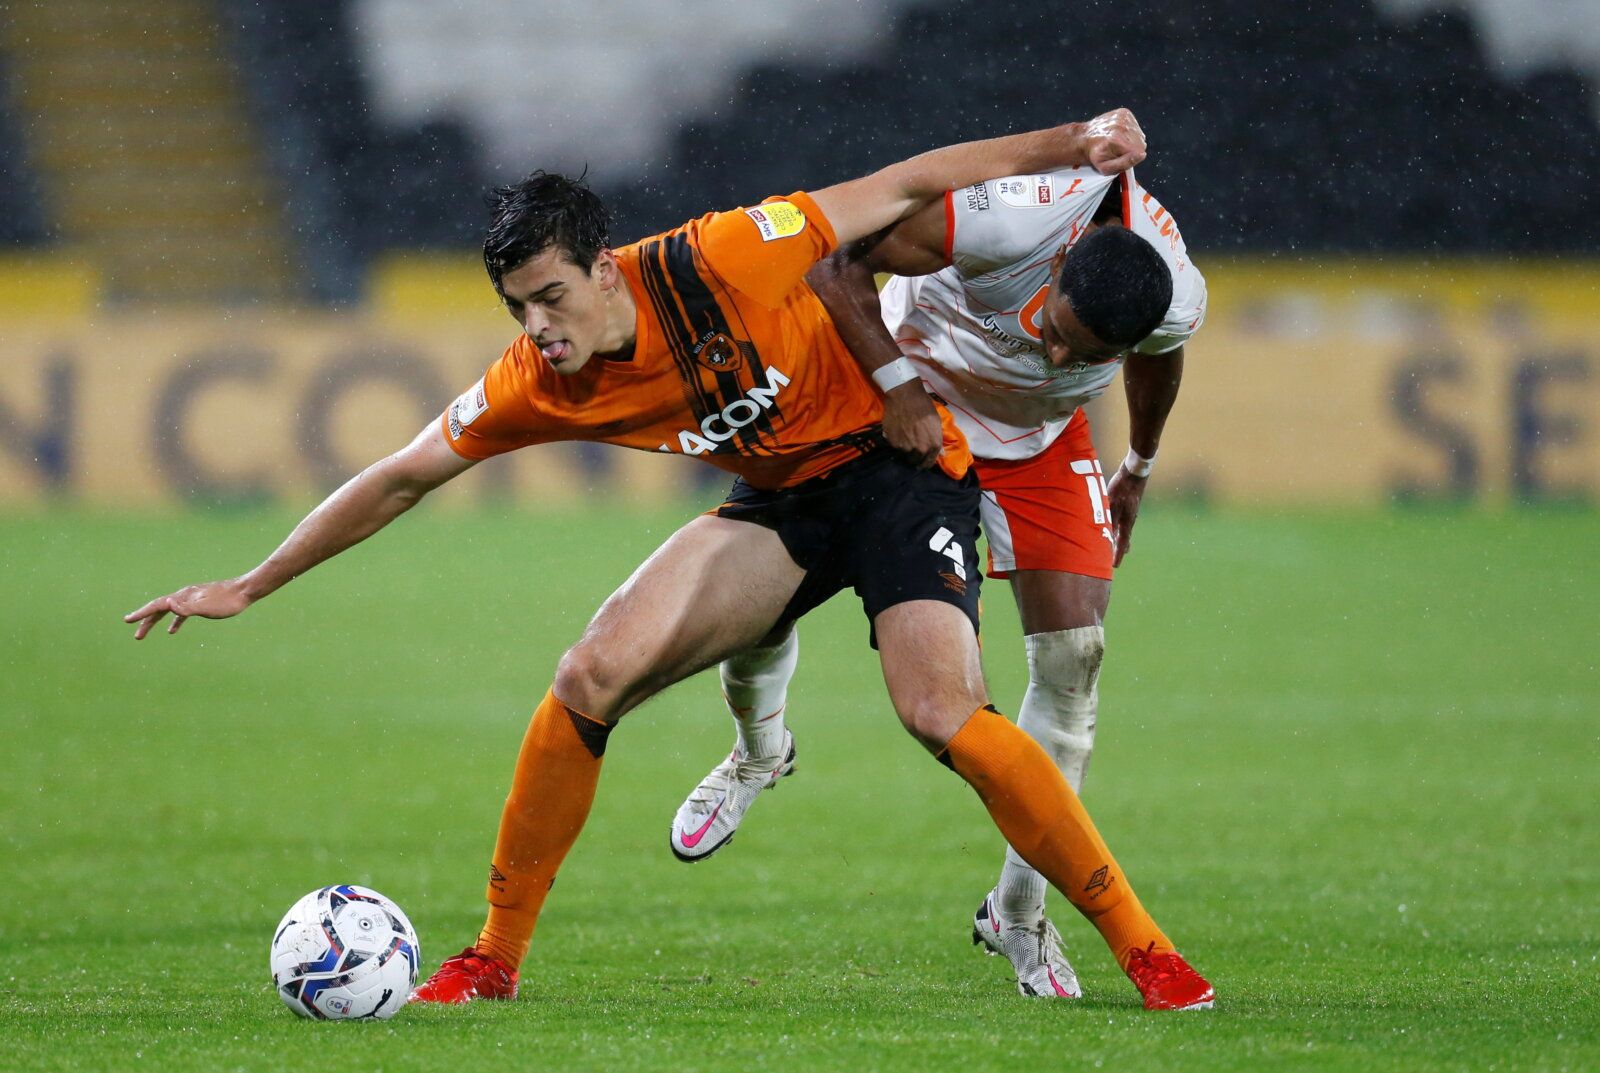 Soccer Football - Championship - Hull City v Blackpool - KCOM Stadium, Hull, Britain - September 28, 2021  Hull City's Jacob Greaves in action with Blackpool's Demetri Mitchell  Action Images/Ed Sykes  EDITORIAL USE ONLY. No use with unauthorized audio, video, data, fixture lists, club/league logos or "live" services. Online in-match use limited to 75 images, no video emulation. No use in betting, games or single club/league/player publications.  Please contact your account representative for fu